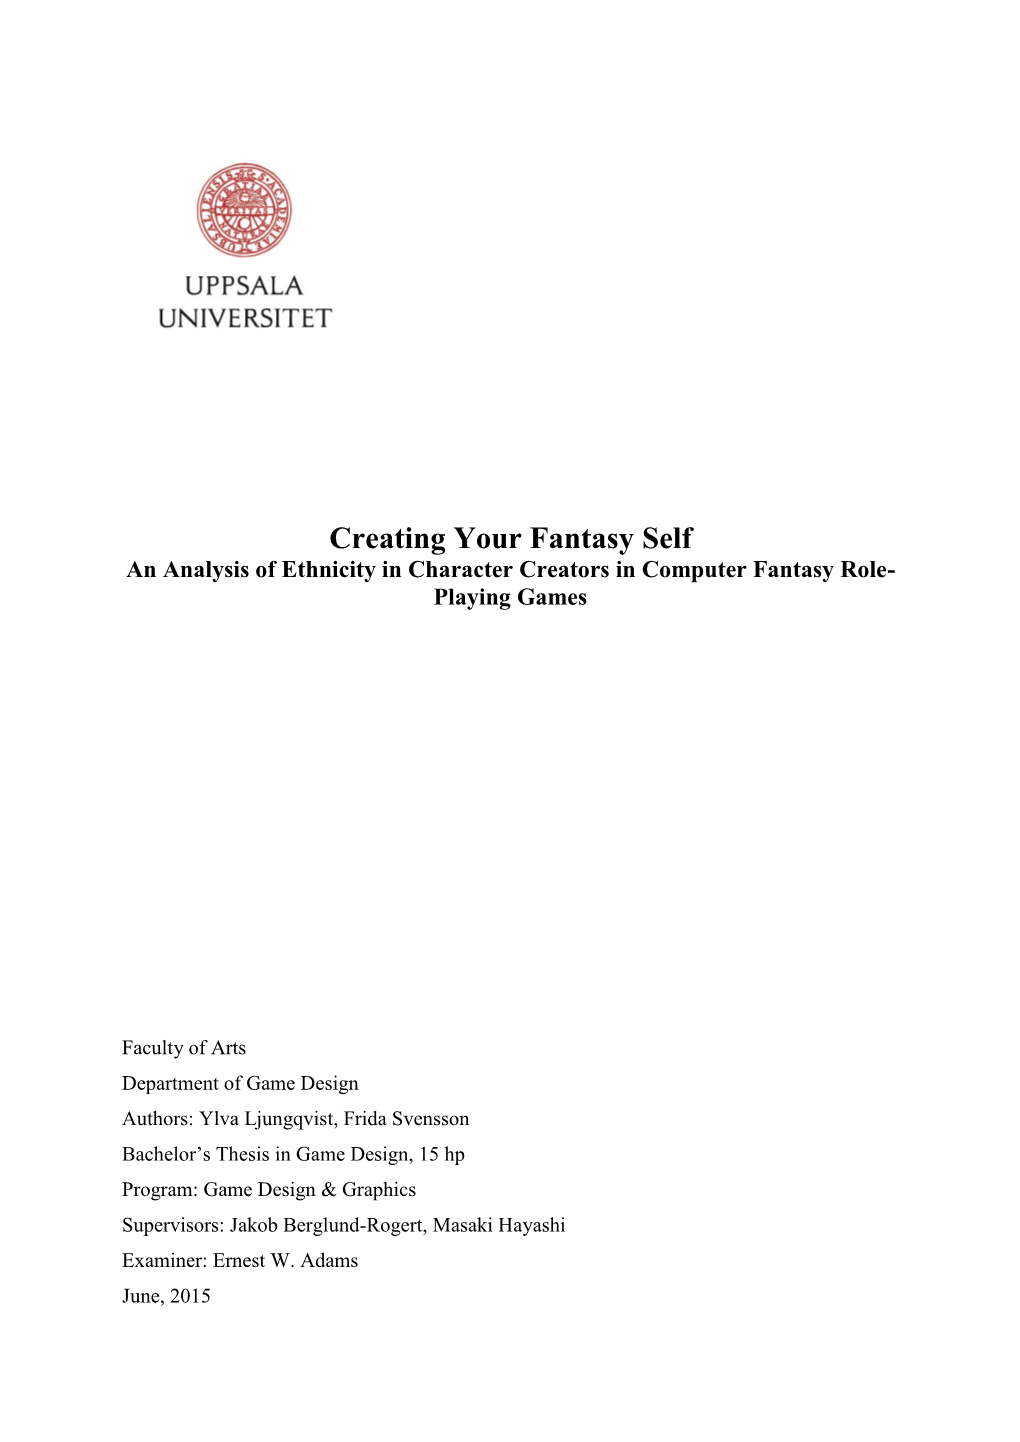 Creating Your Fantasy Self an Analysis of Ethnicity in Character Creators in Computer Fantasy Role- Playing Games